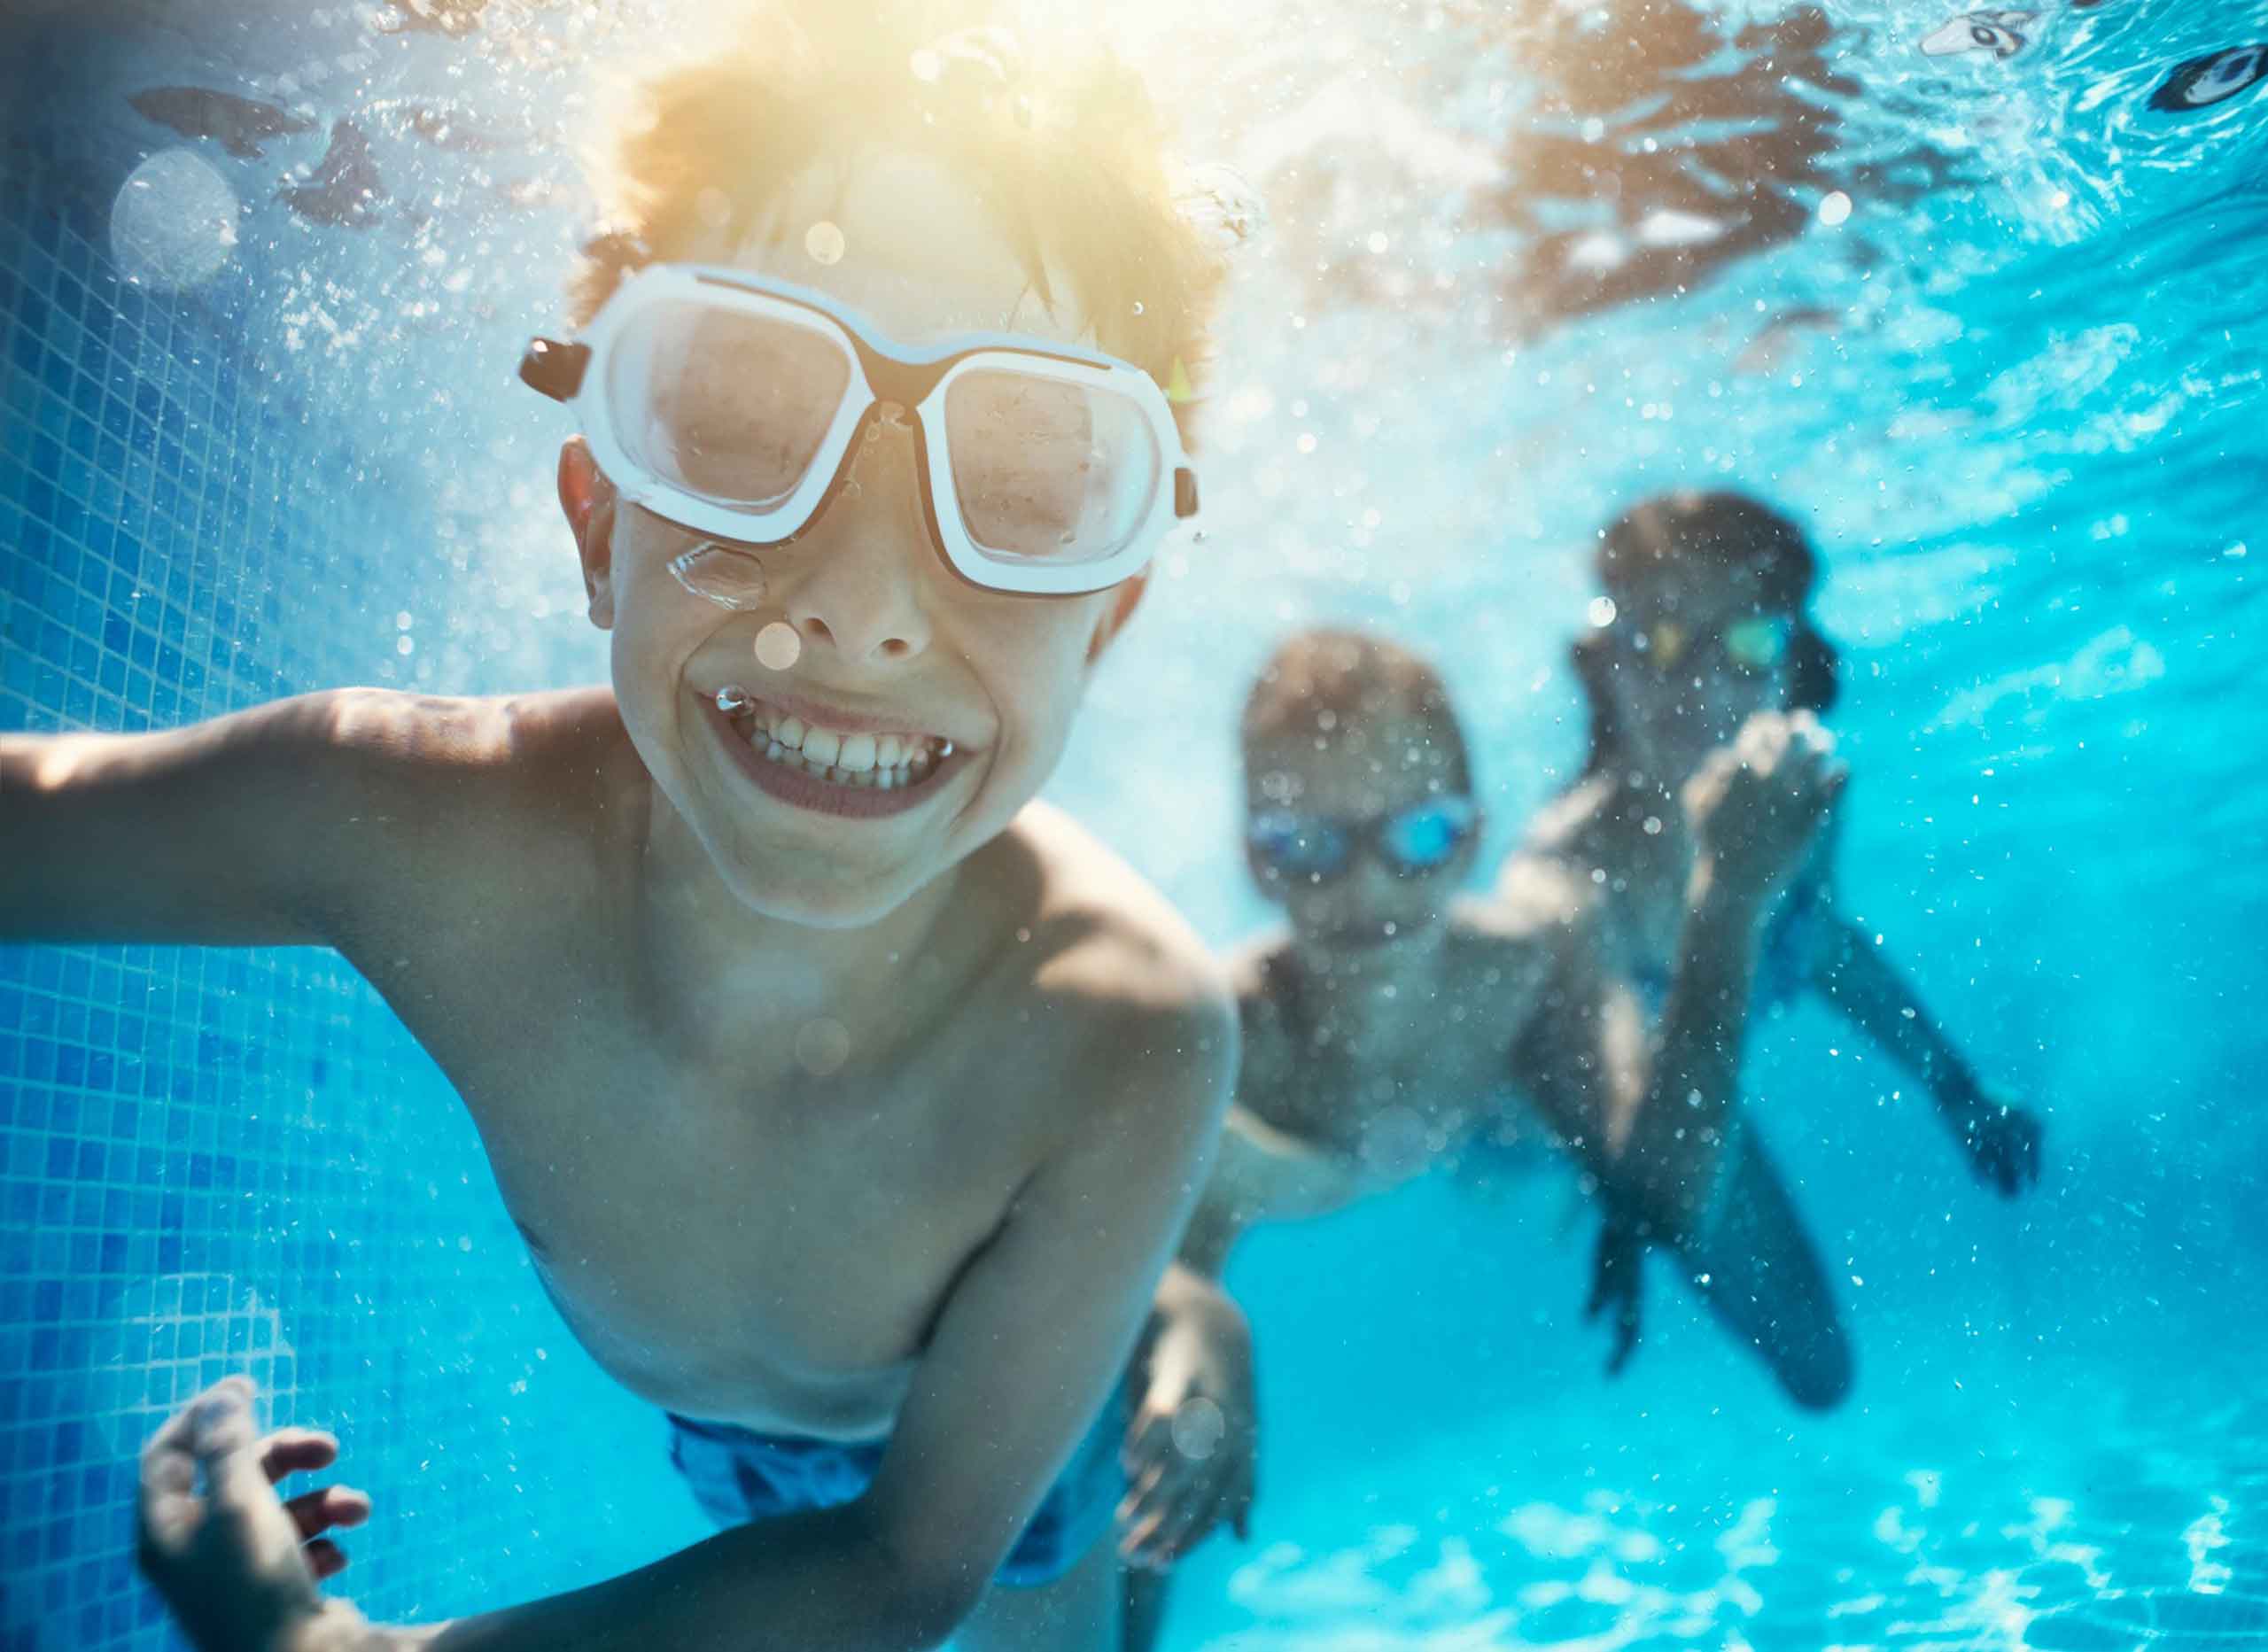 A photo of chidren swimming underwater in a pool with blue tiles.